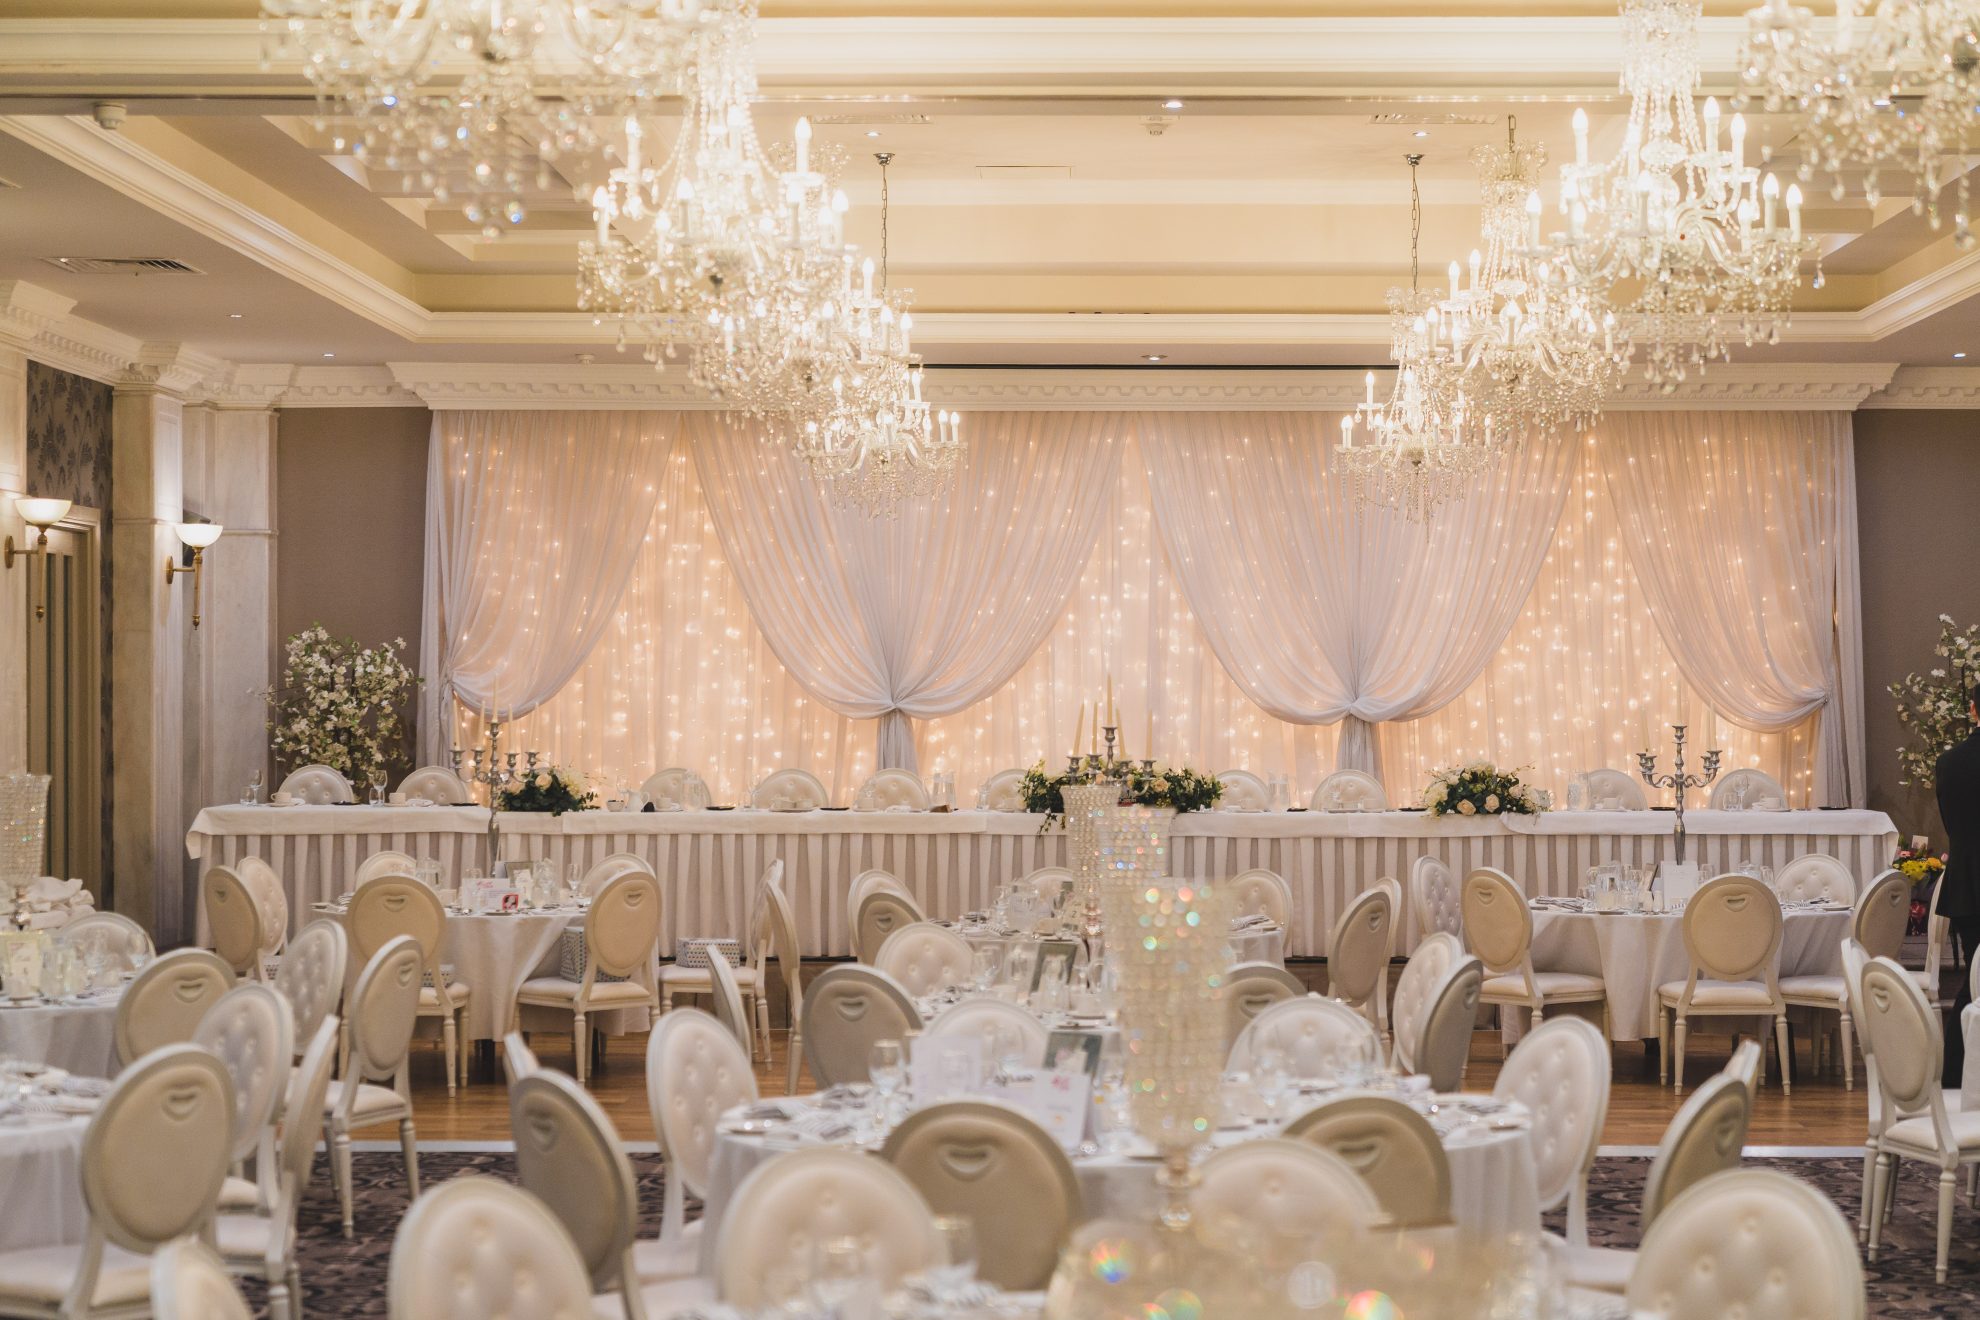 The ballroom At The Manor House Country Hotel